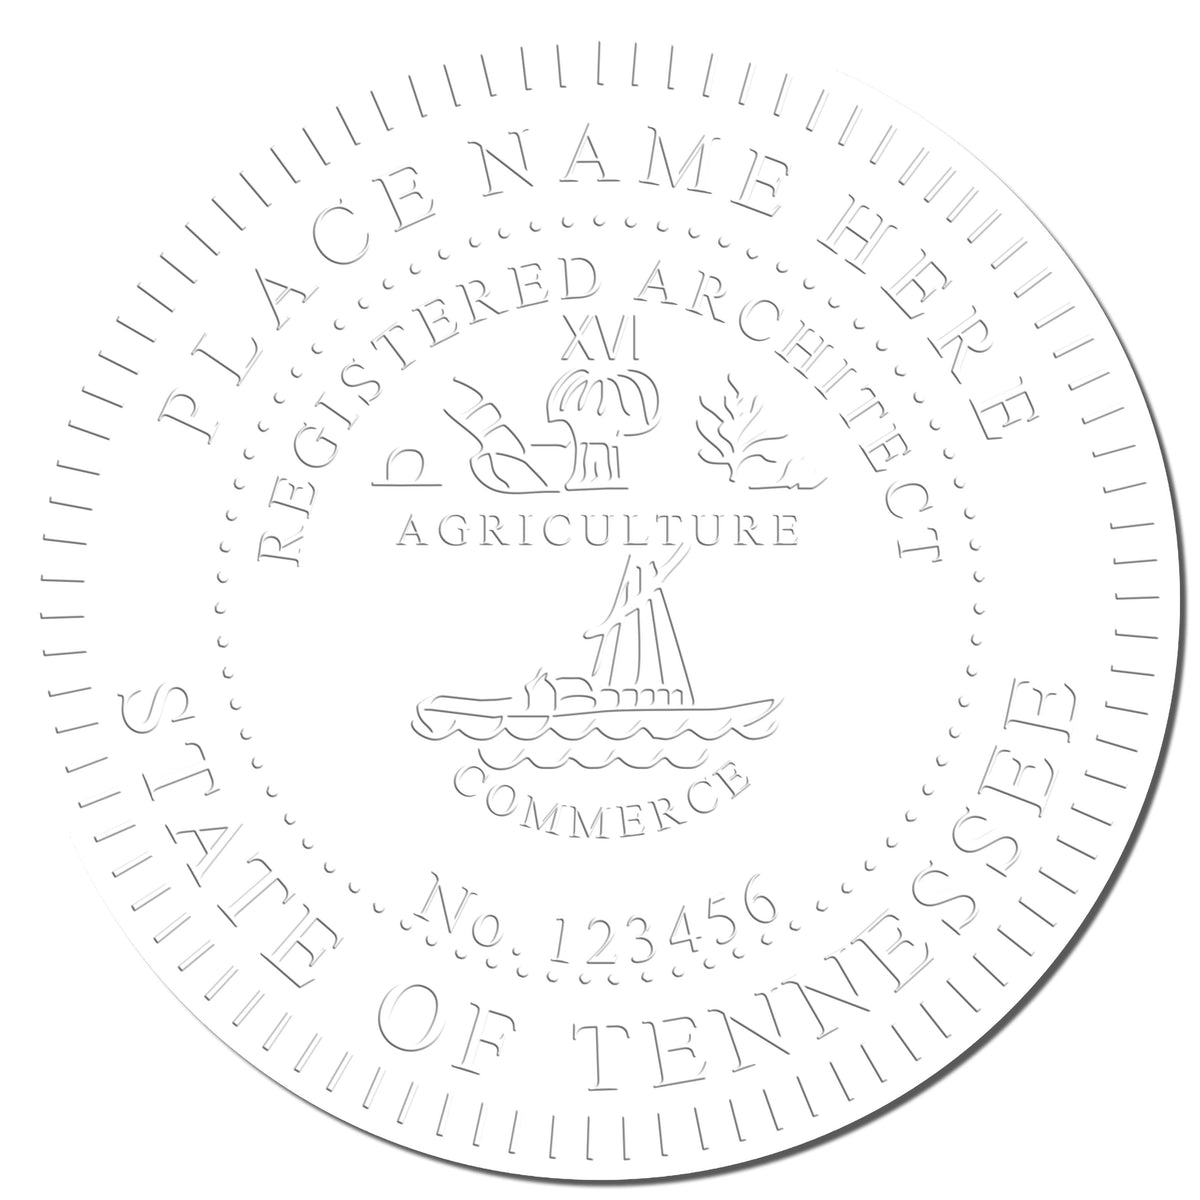 This paper is stamped with a sample imprint of the Gift Tennessee Architect Seal, signifying its quality and reliability.